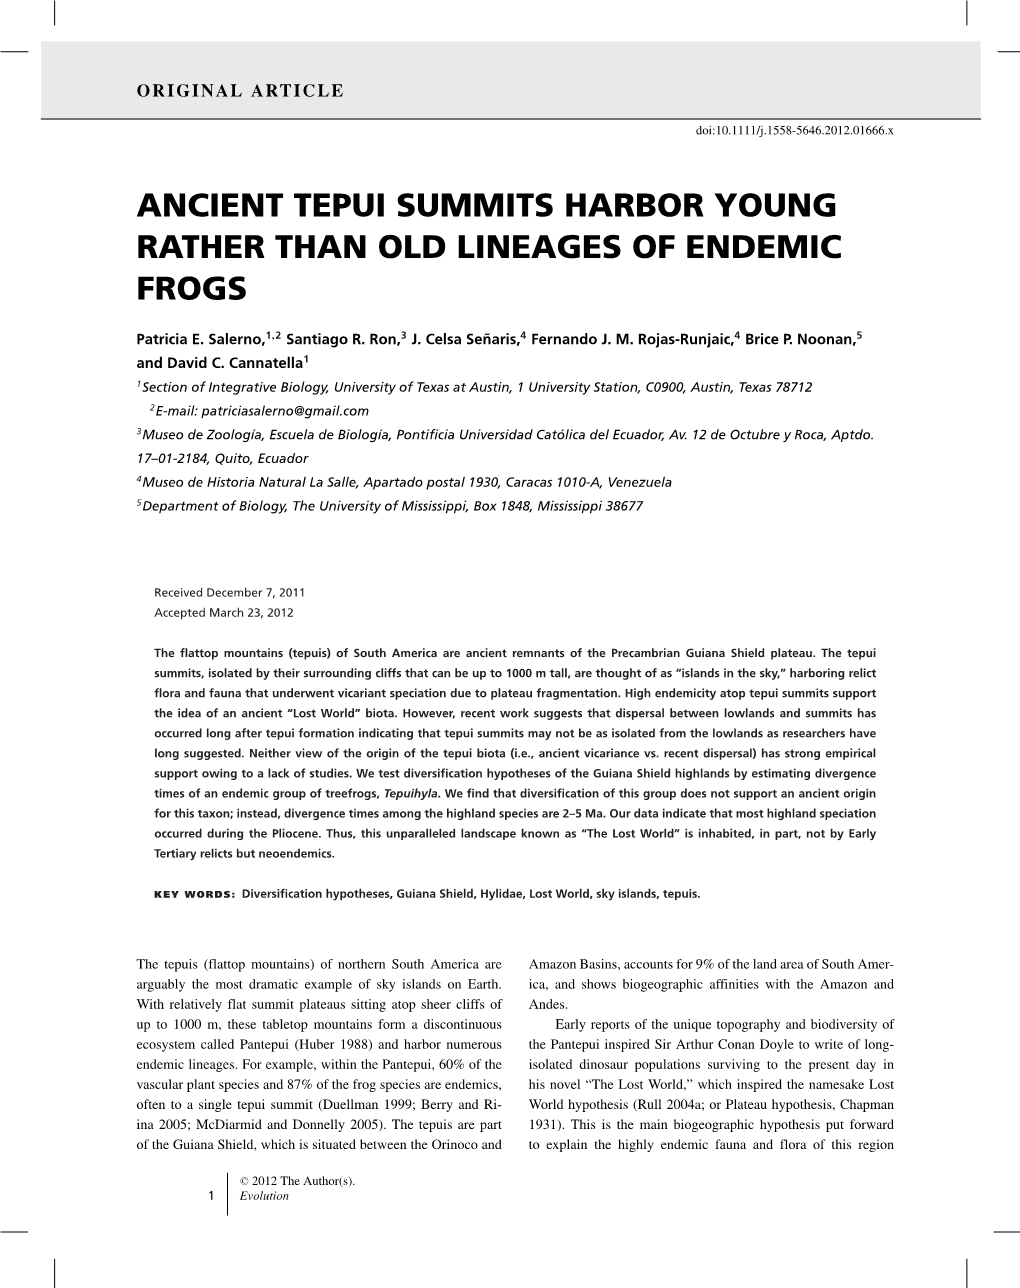 Ancient Tepui Summits Harbor Young Rather Than Old Lineages of Endemic Frogs